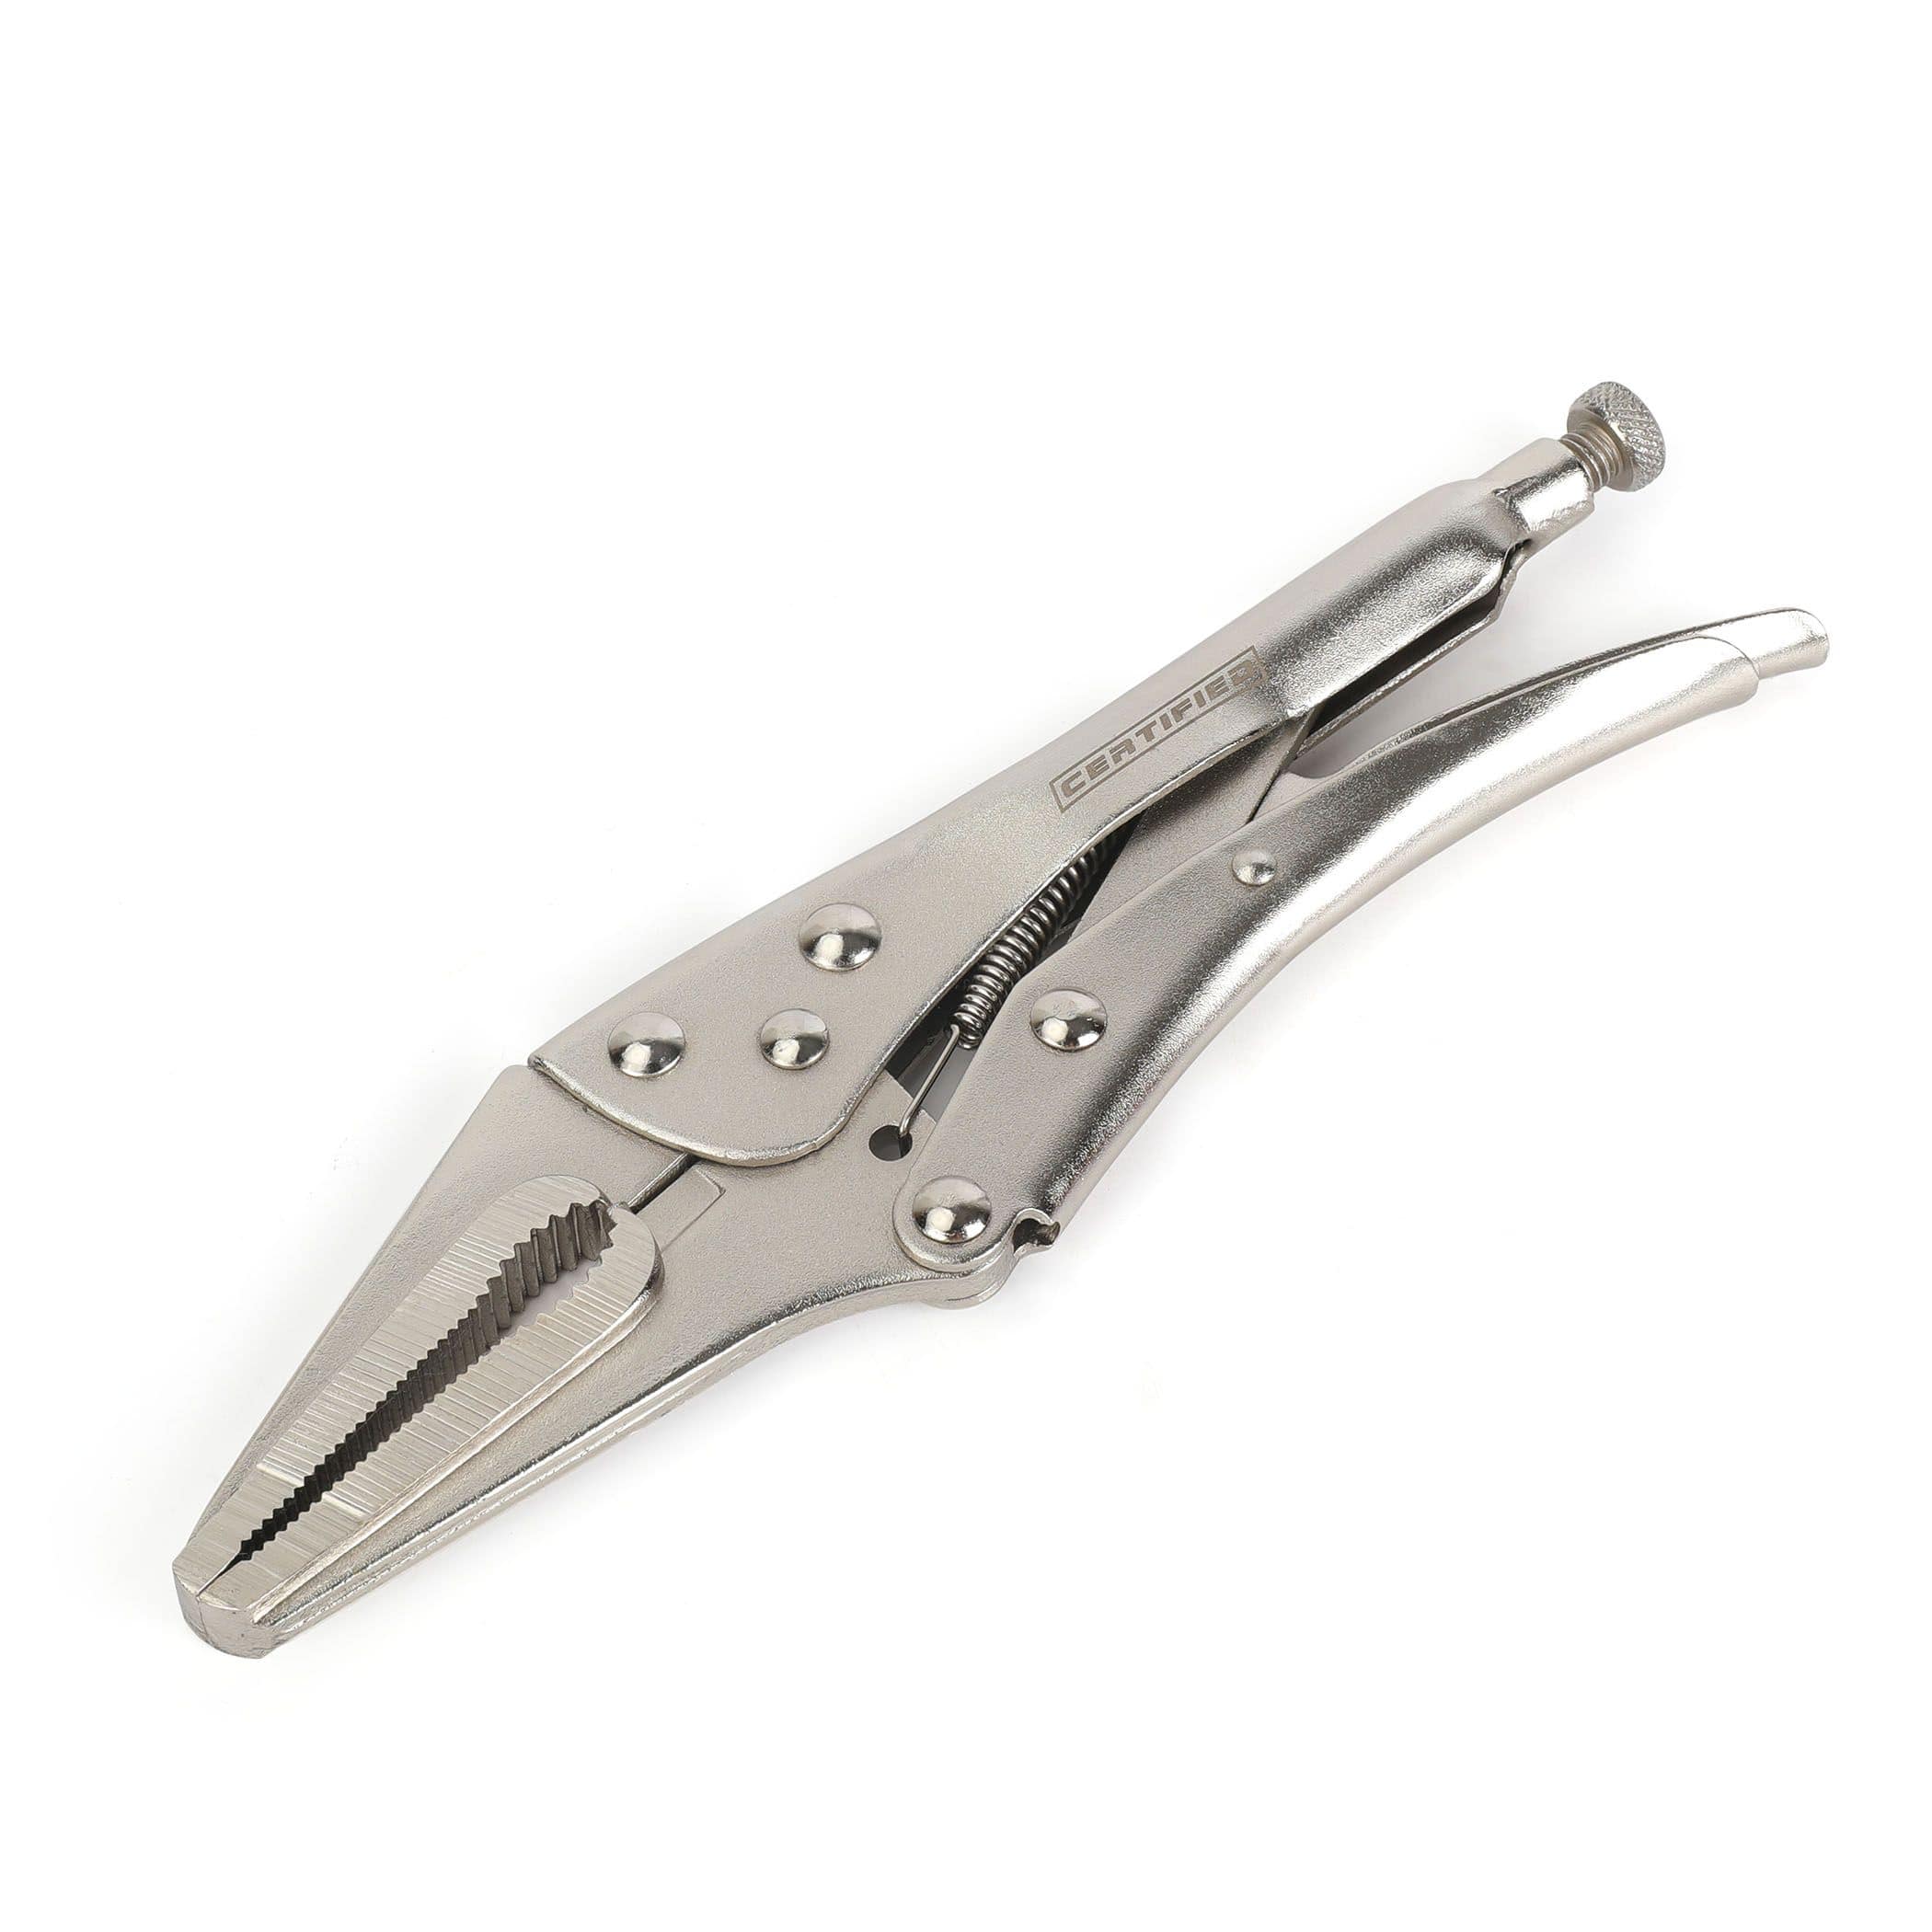 Certified Locking Pliers Set, High Carbon Steel Handles with